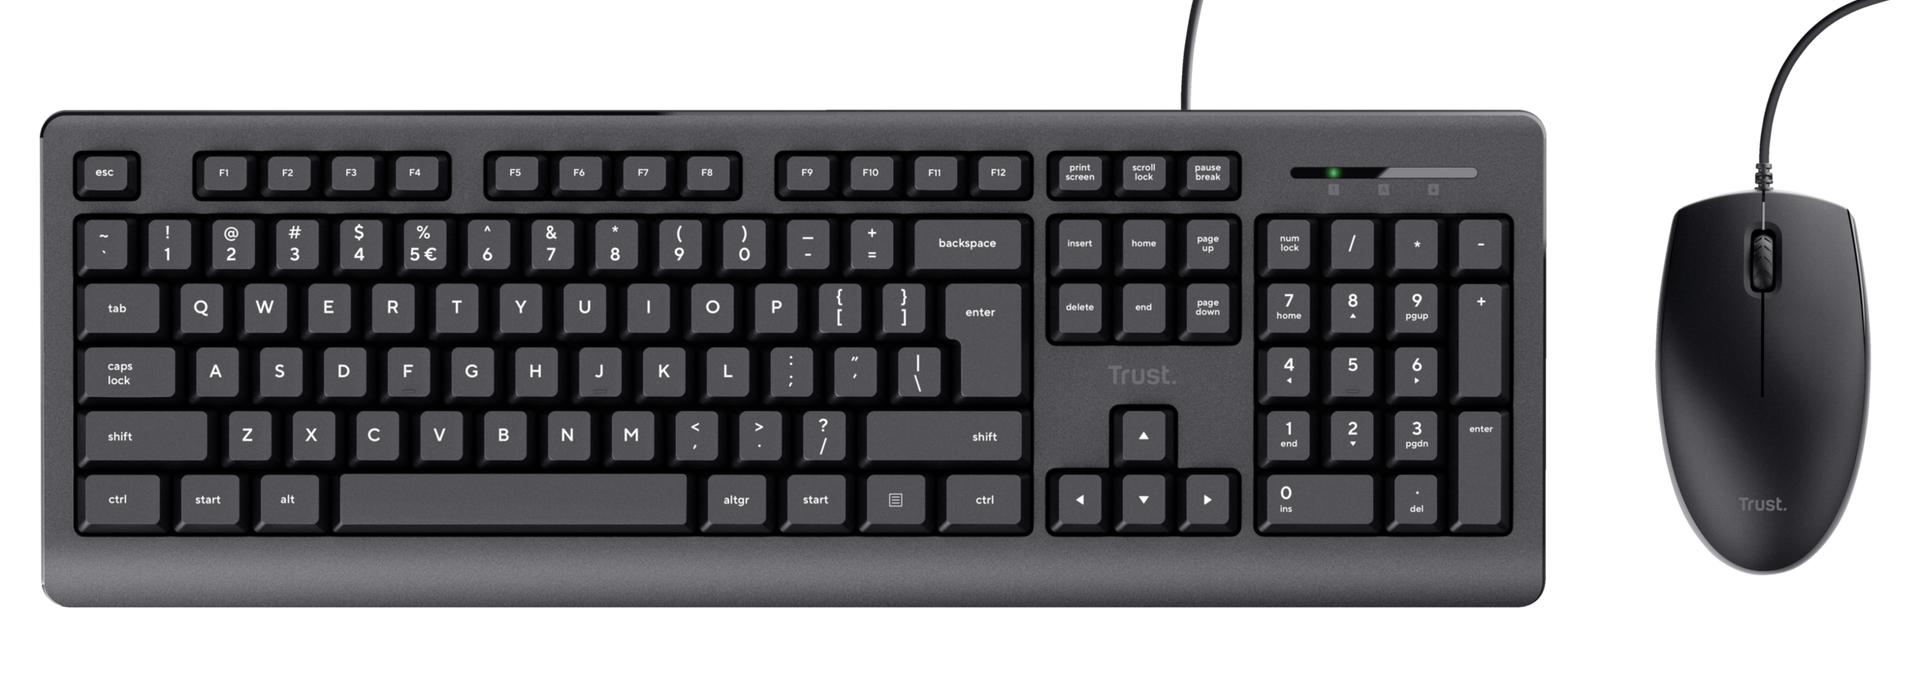 Wired Keyboard and Mouse Set-Top